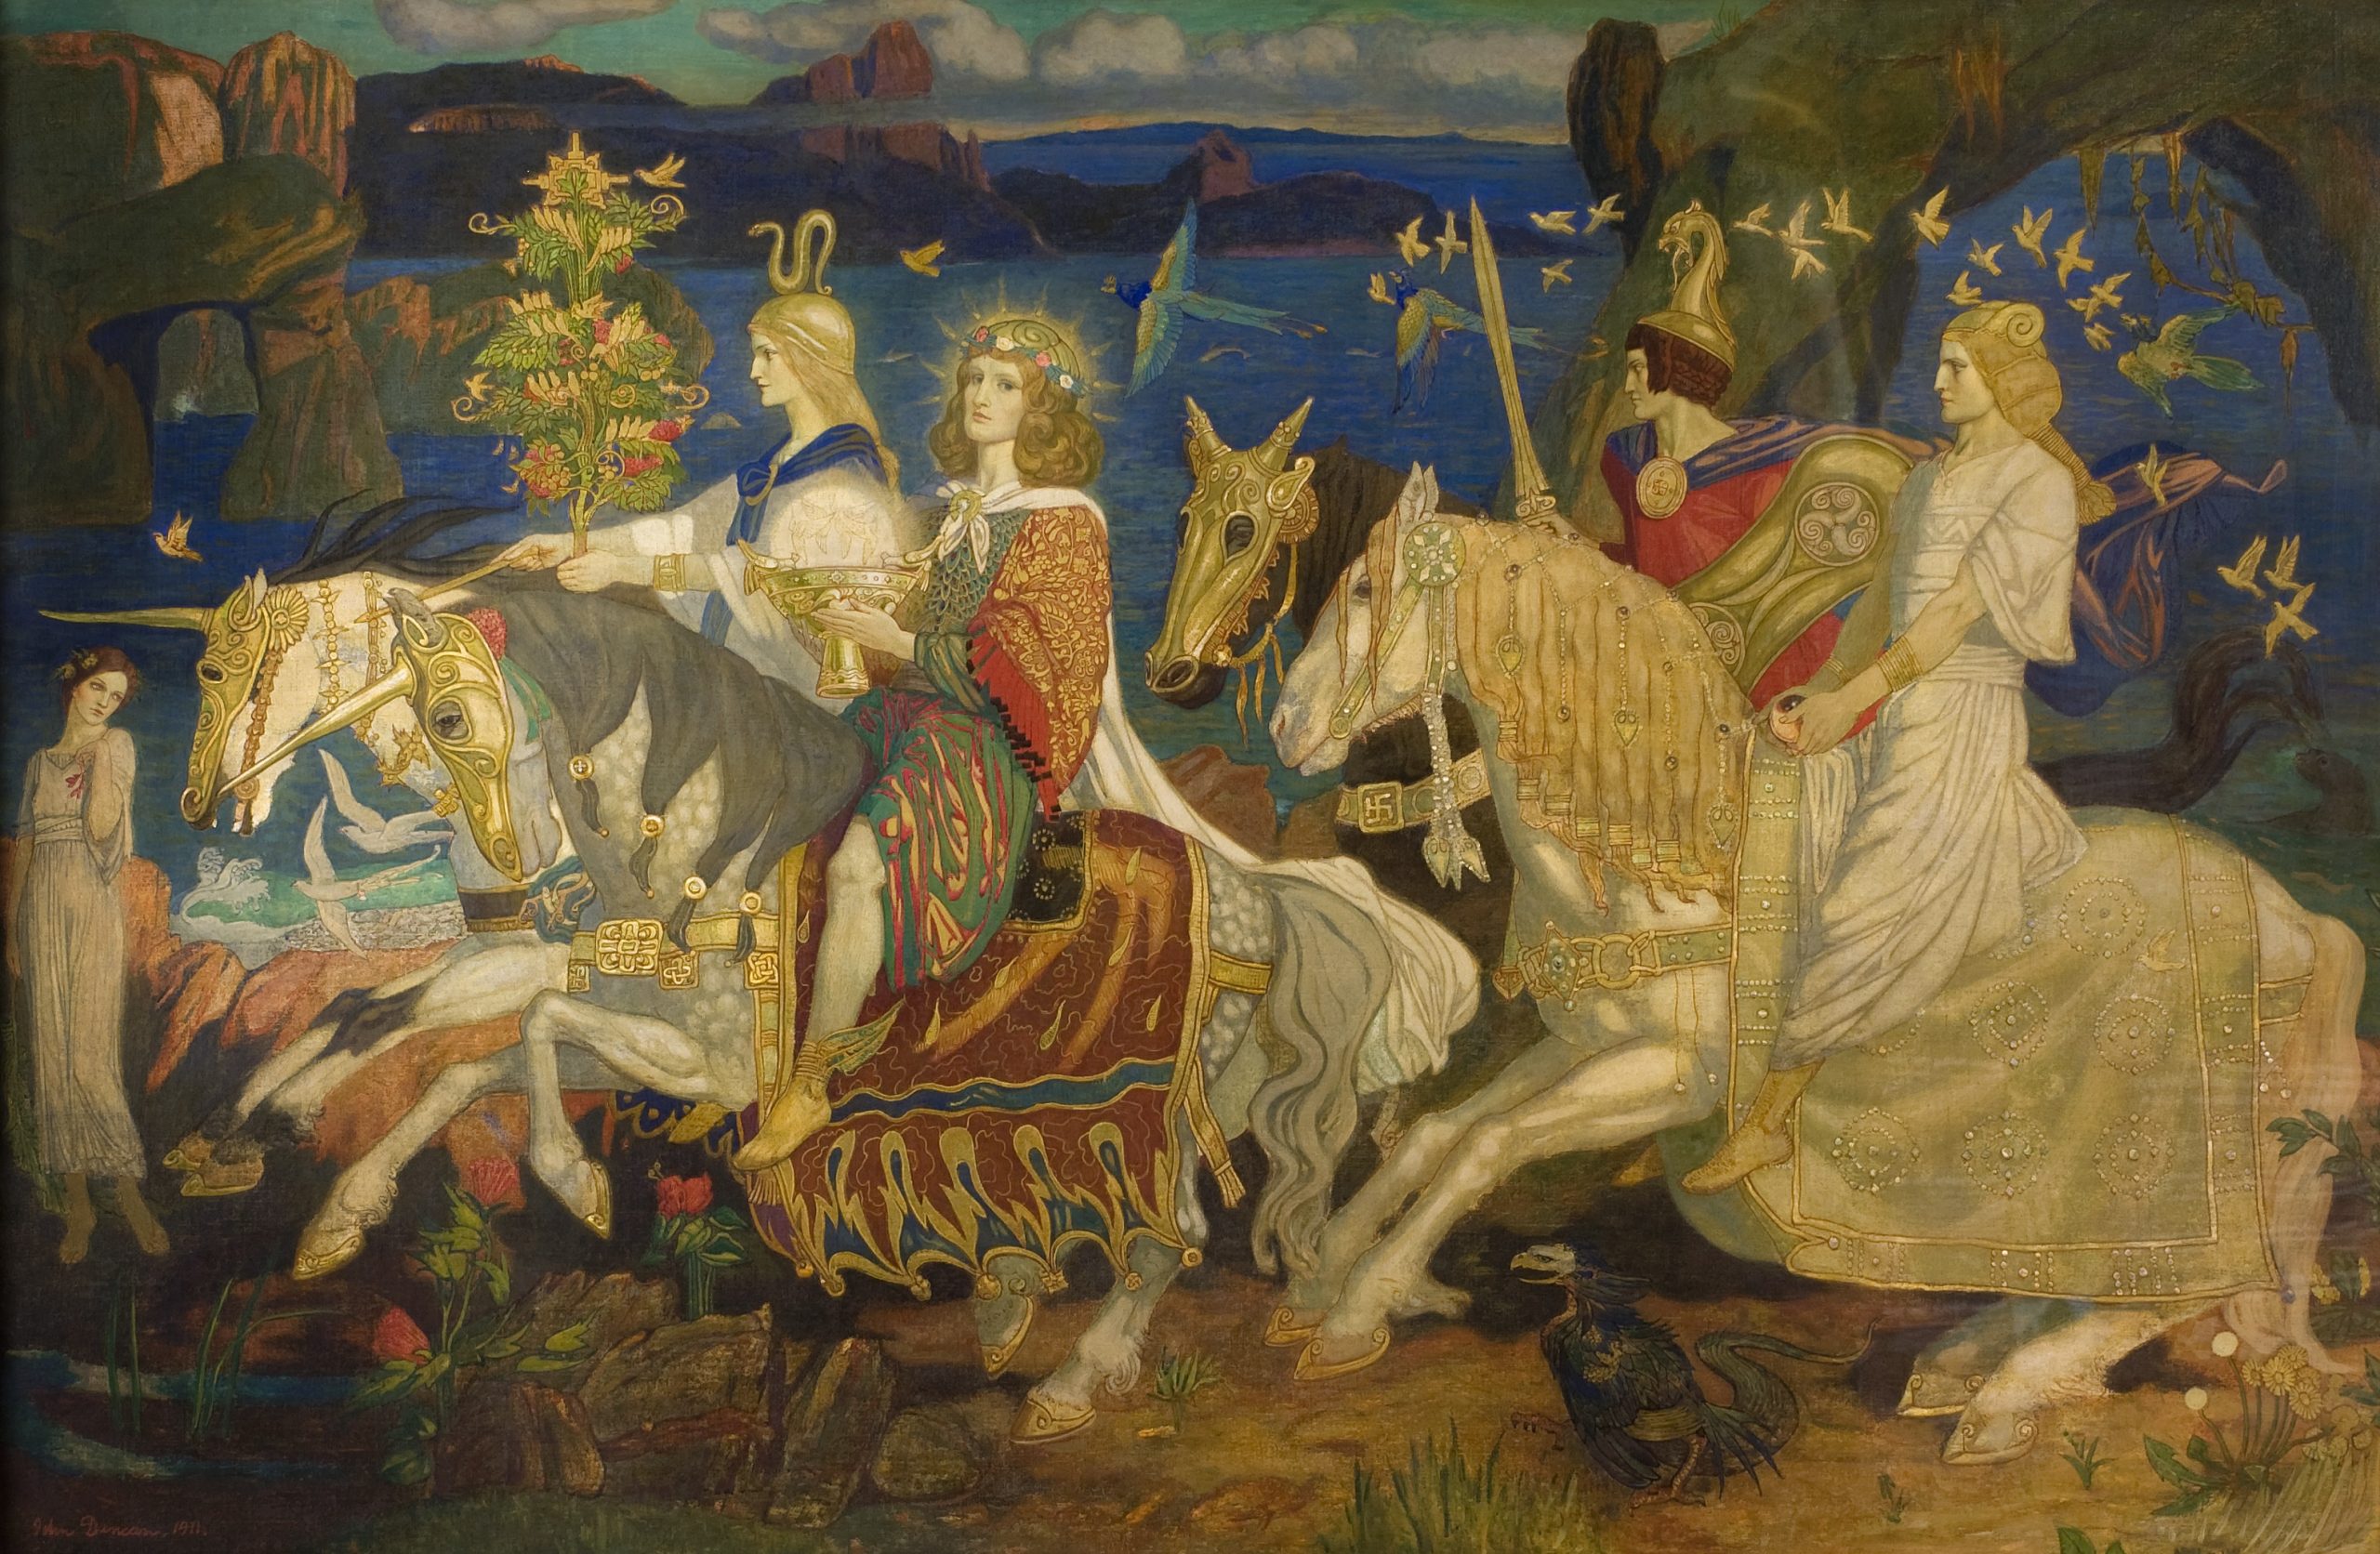 A group of figures on horseback in a magical landscape